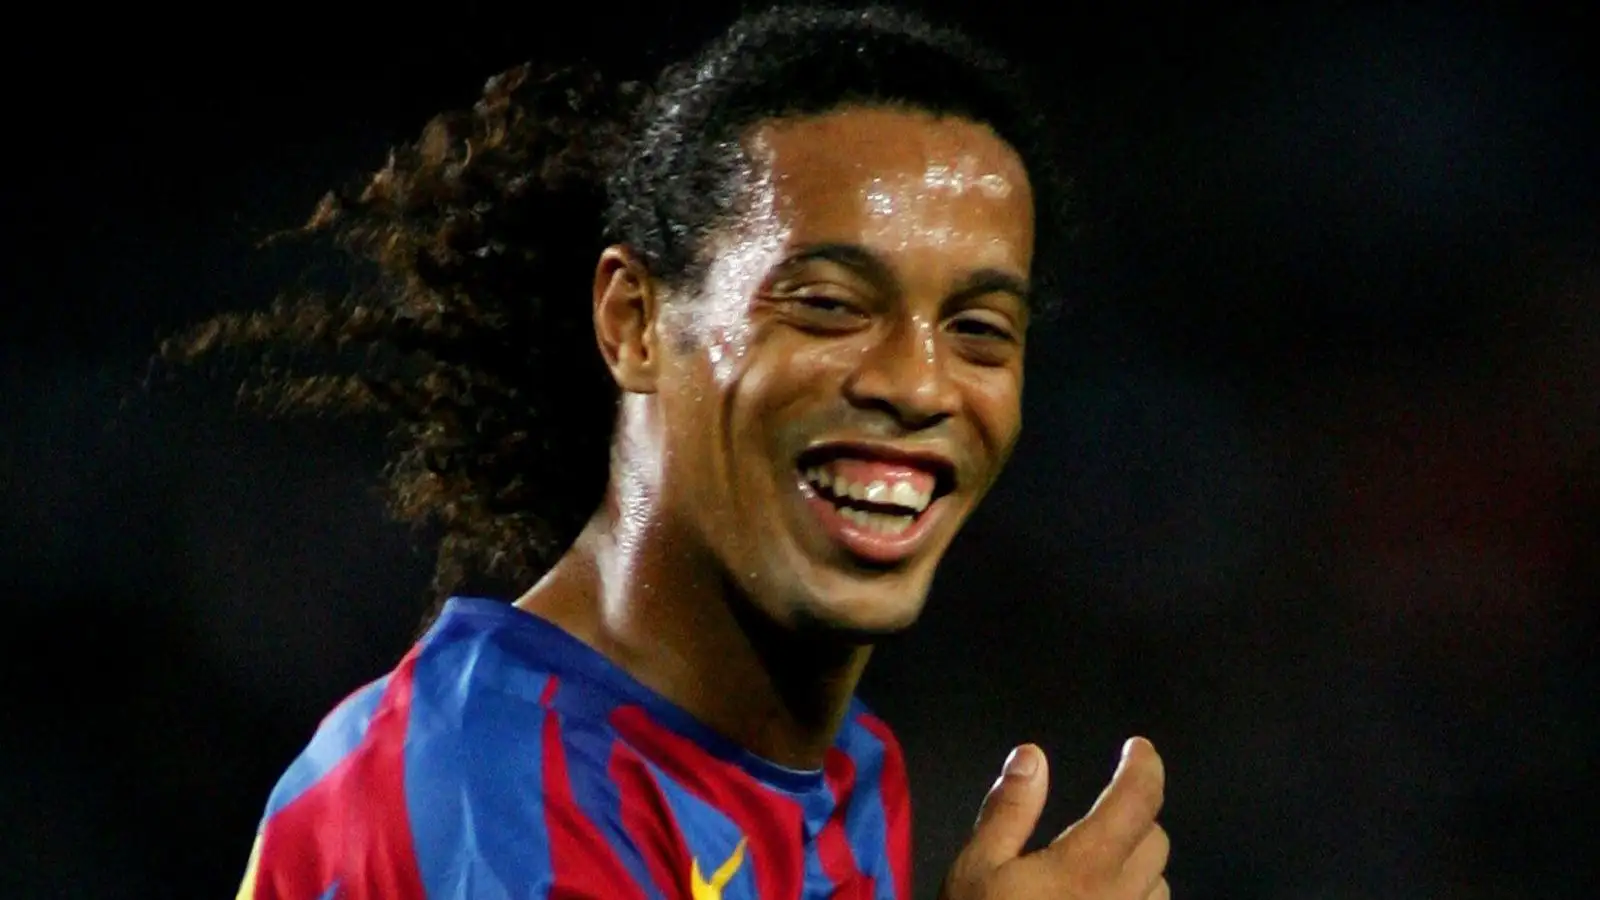 When Ronaldinho avoided a slide tackle as easily as you’d sidestep a turd